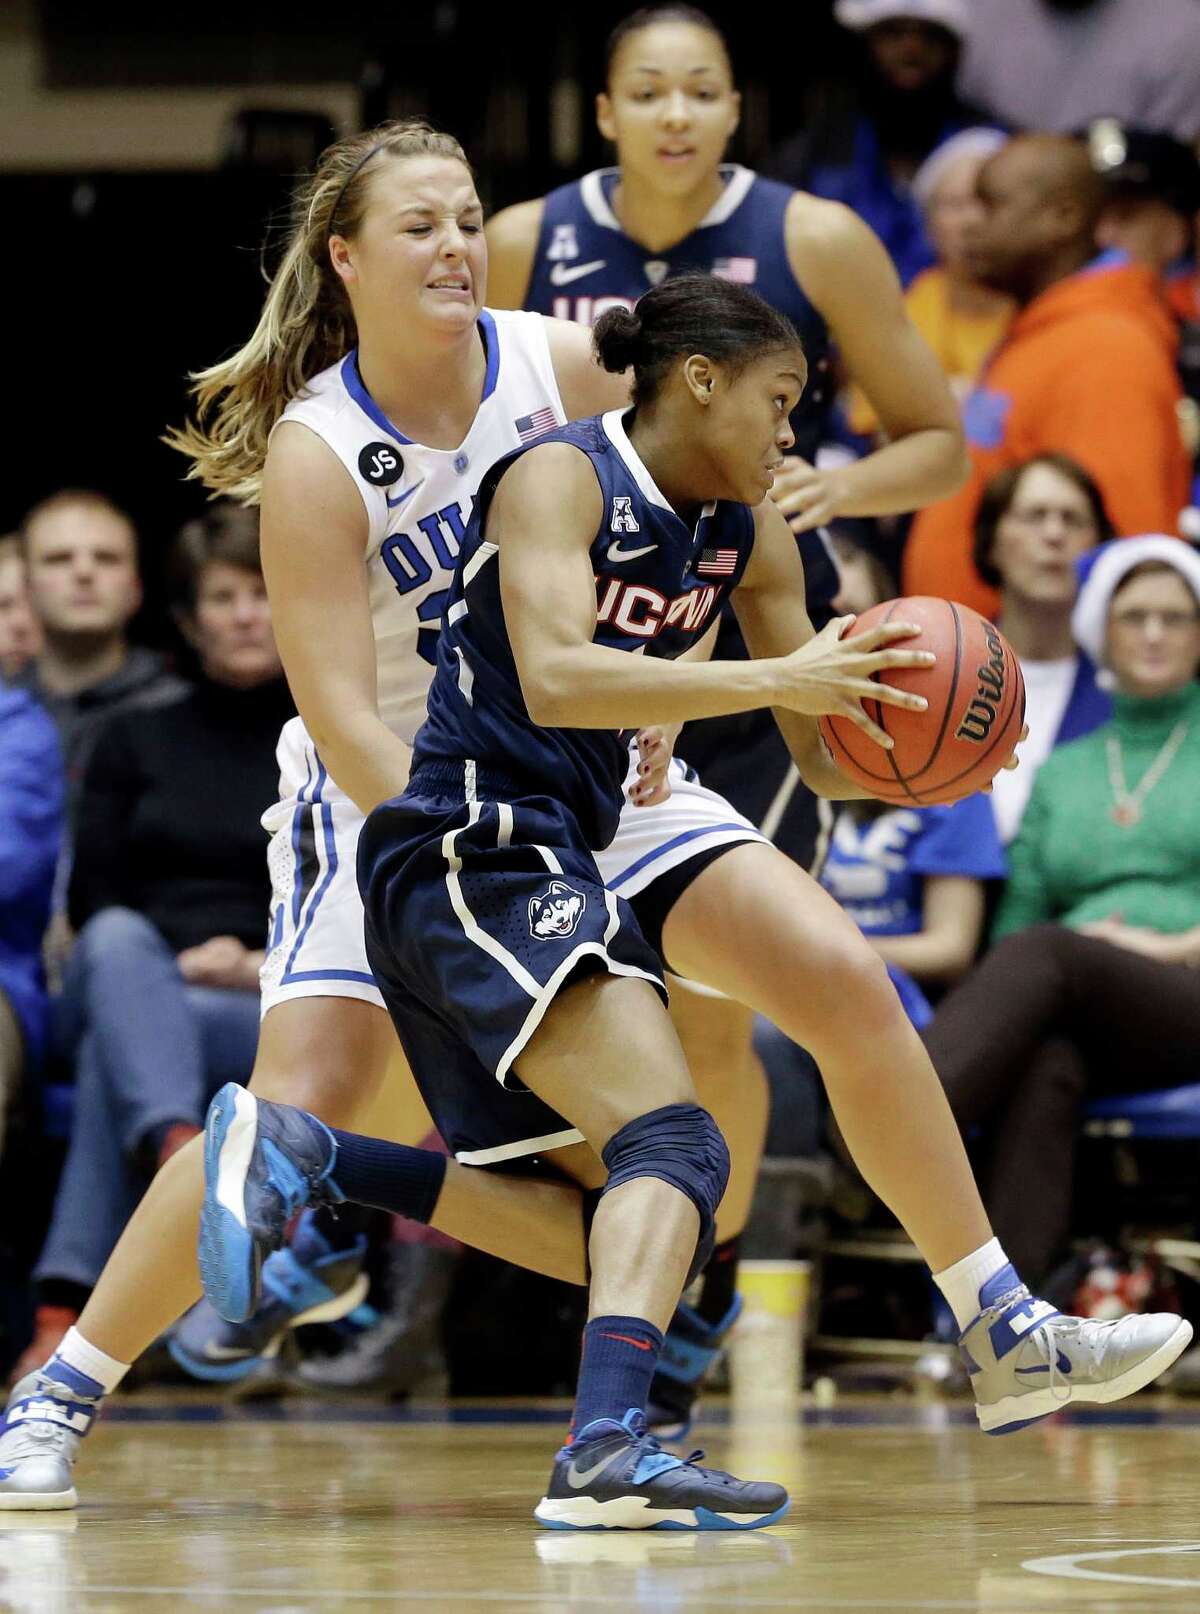 Connecticut's Moriah Jefferson is guarded by Duke's Tricia Liston, rear, during the first half of an NCAA college basketball game in Durham, N.C., Tuesday, Dec. 17, 2013. (AP Photo/Gerry Broome)